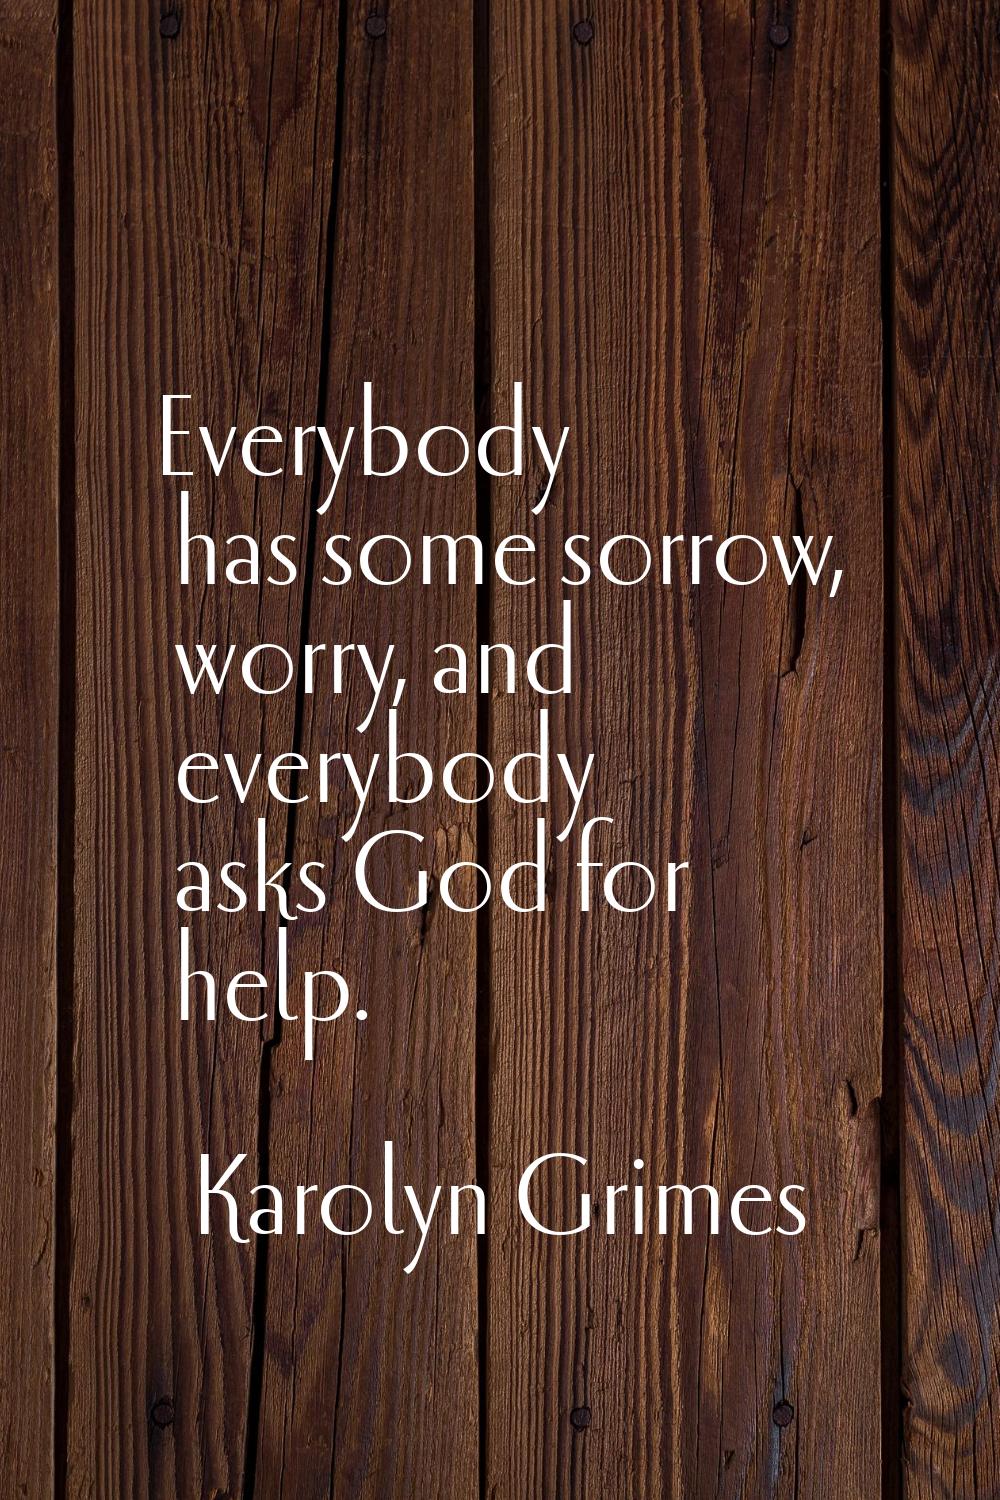 Everybody has some sorrow, worry, and everybody asks God for help.